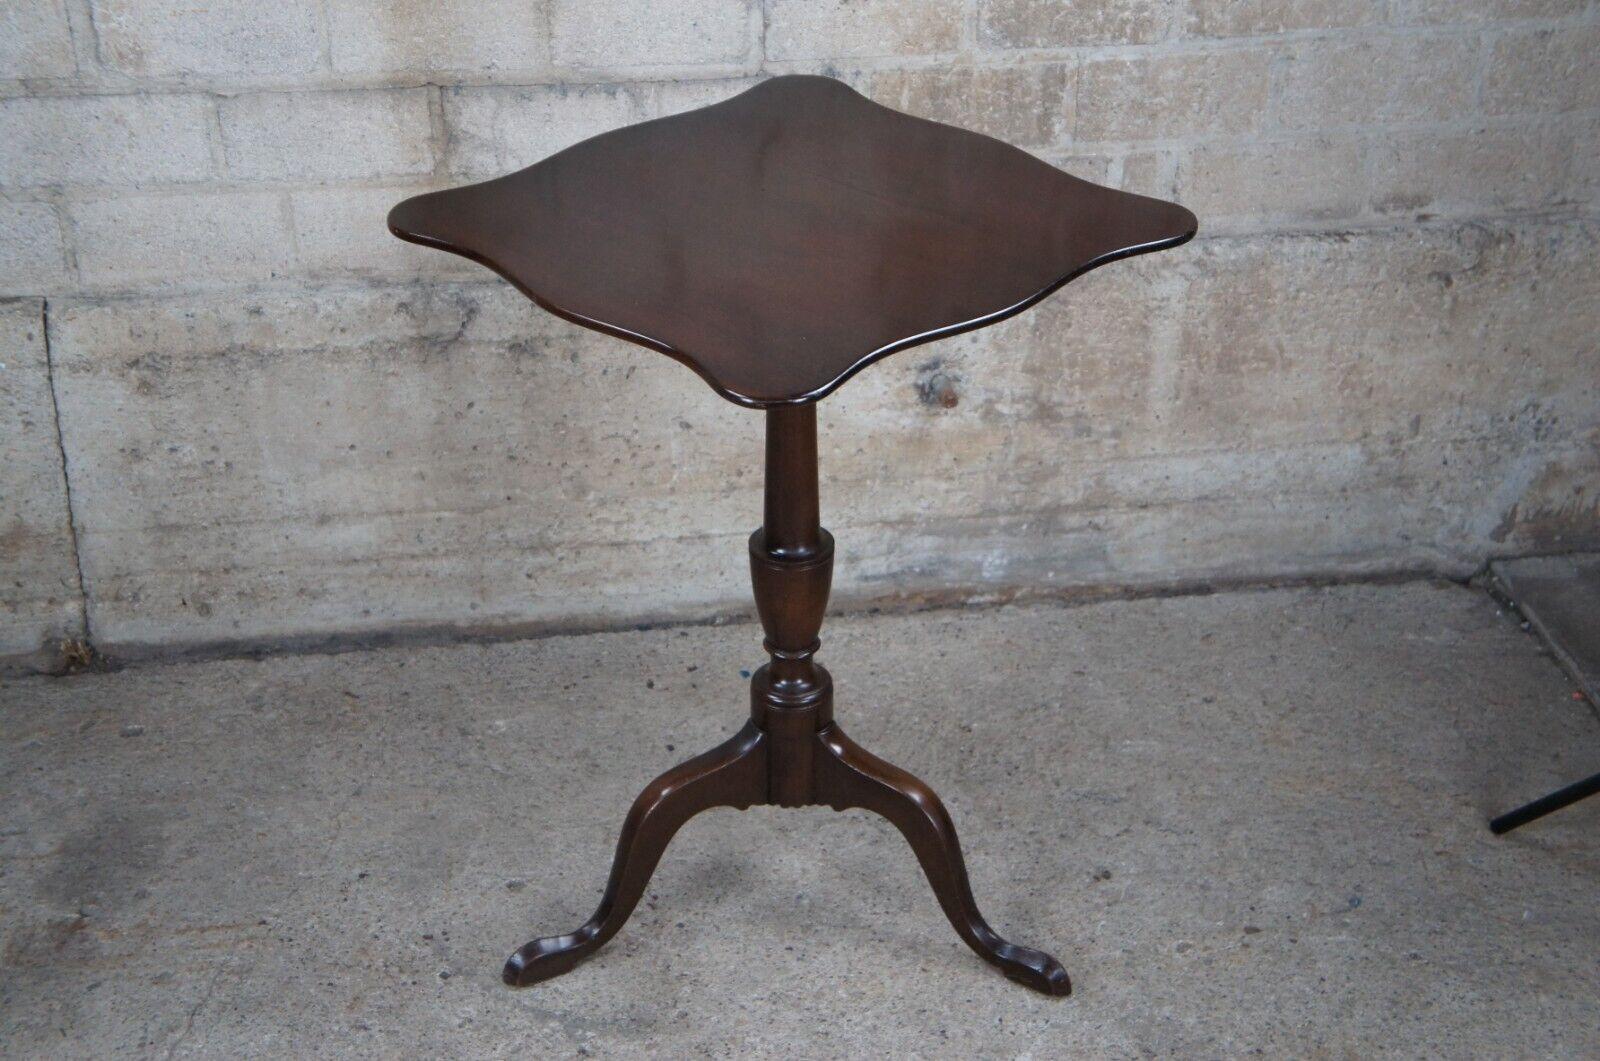 2 Kittinger Colonial Williamsburg Federal Mahogany Tilt Top Tables Candle Stands In Good Condition For Sale In Dayton, OH